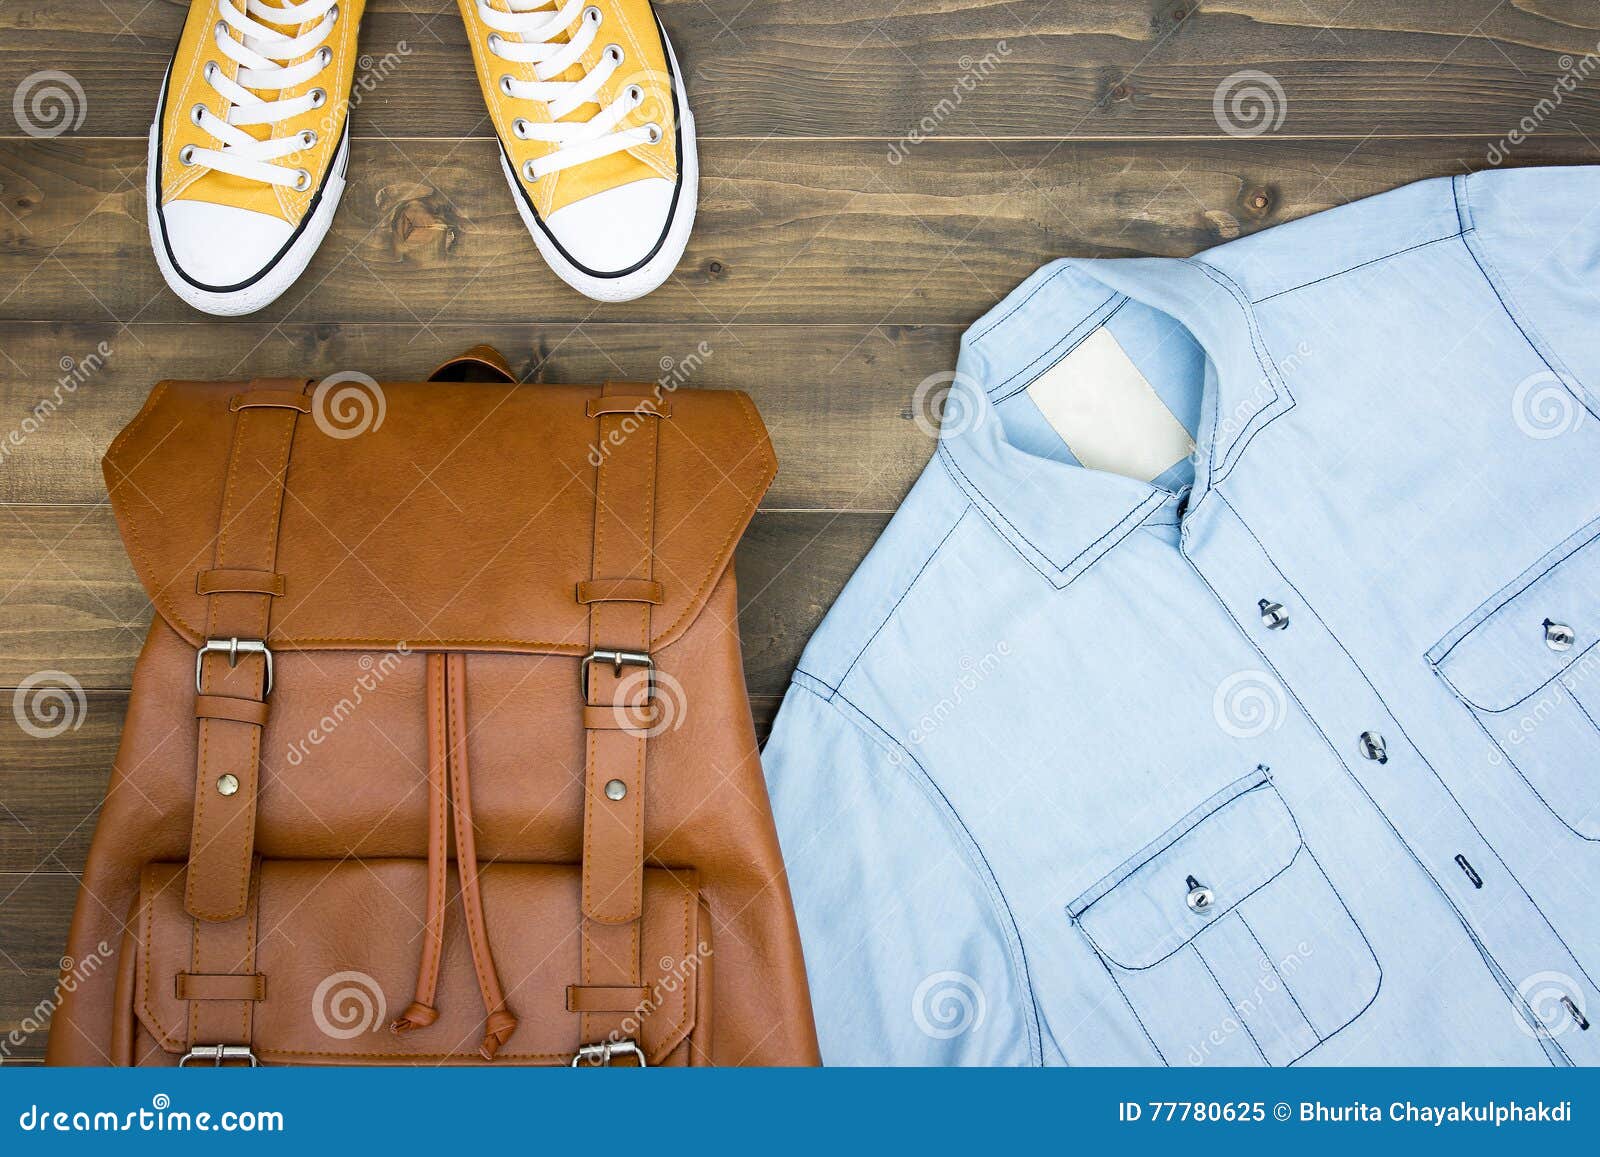 Flat Lay Photography of Men Casual Outfits Stock Image - Image of ...